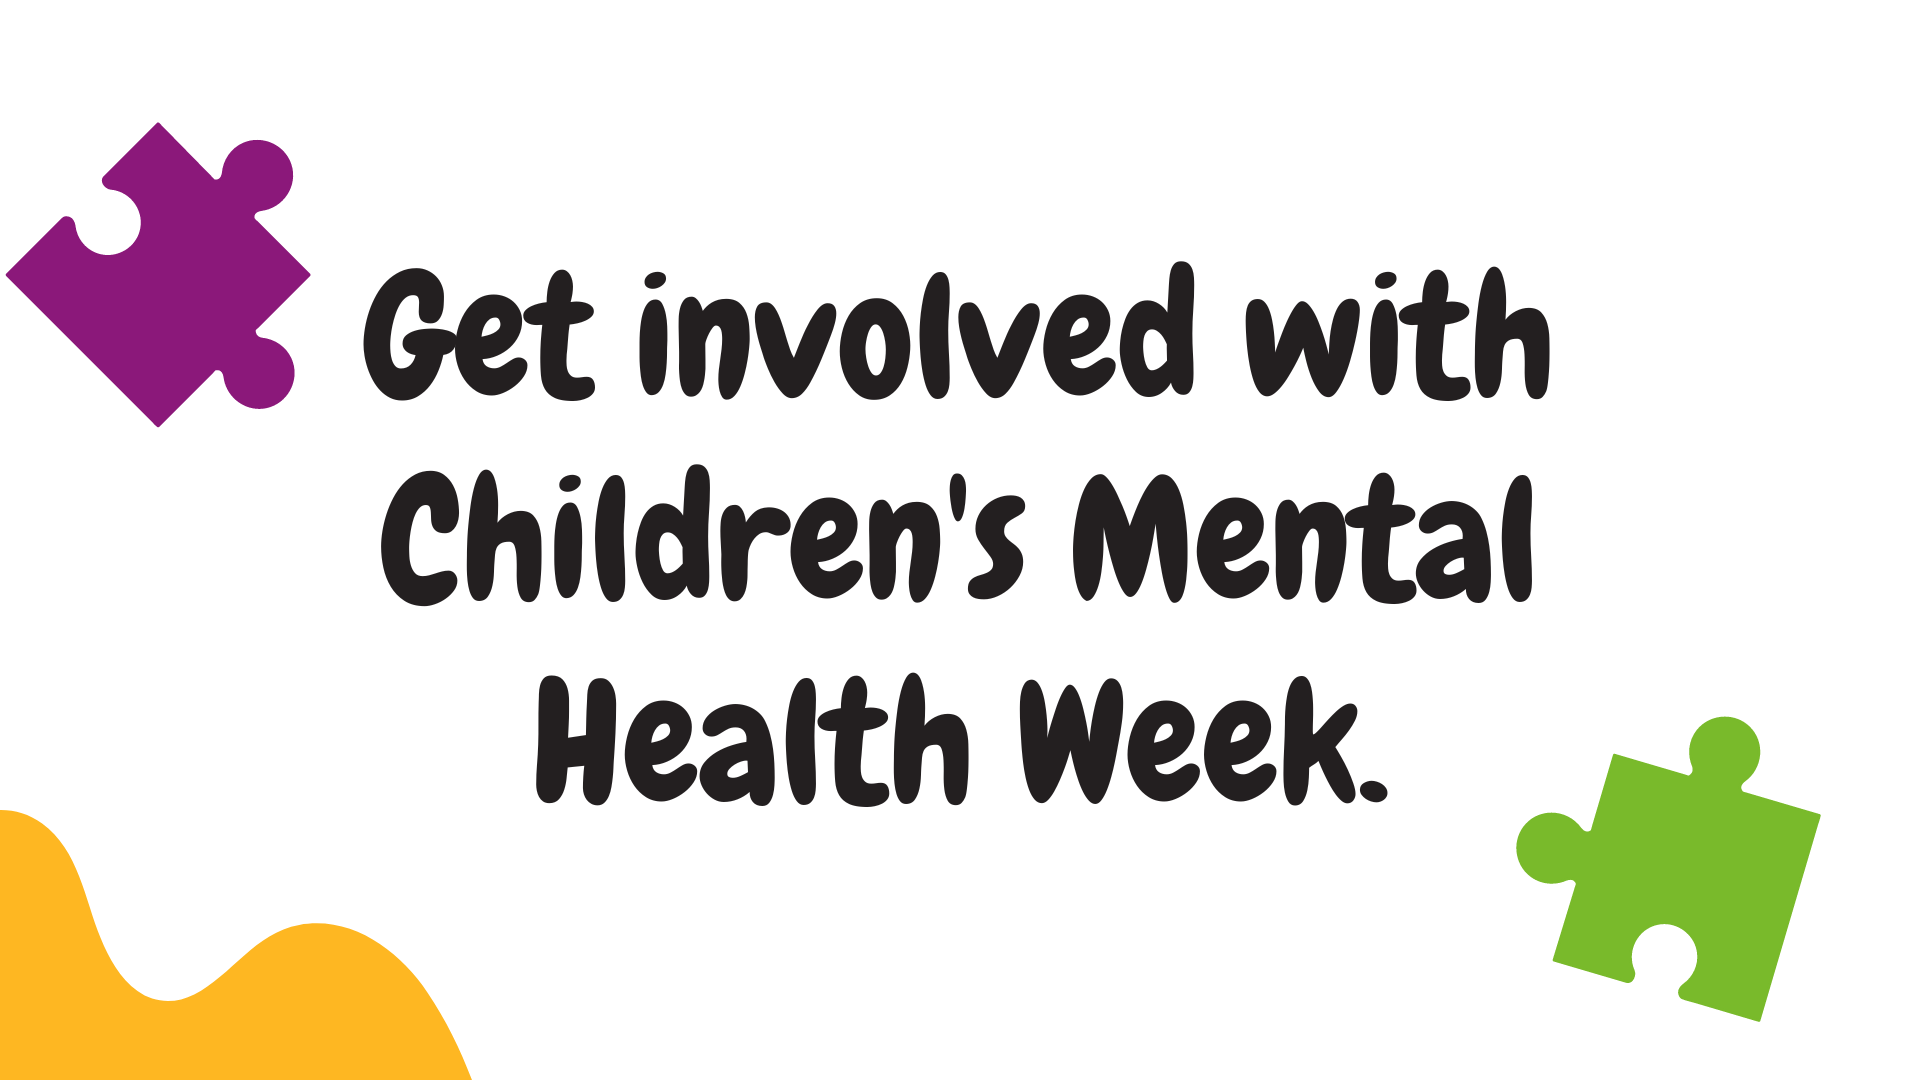 Get involved with Children's Mental Health Week.